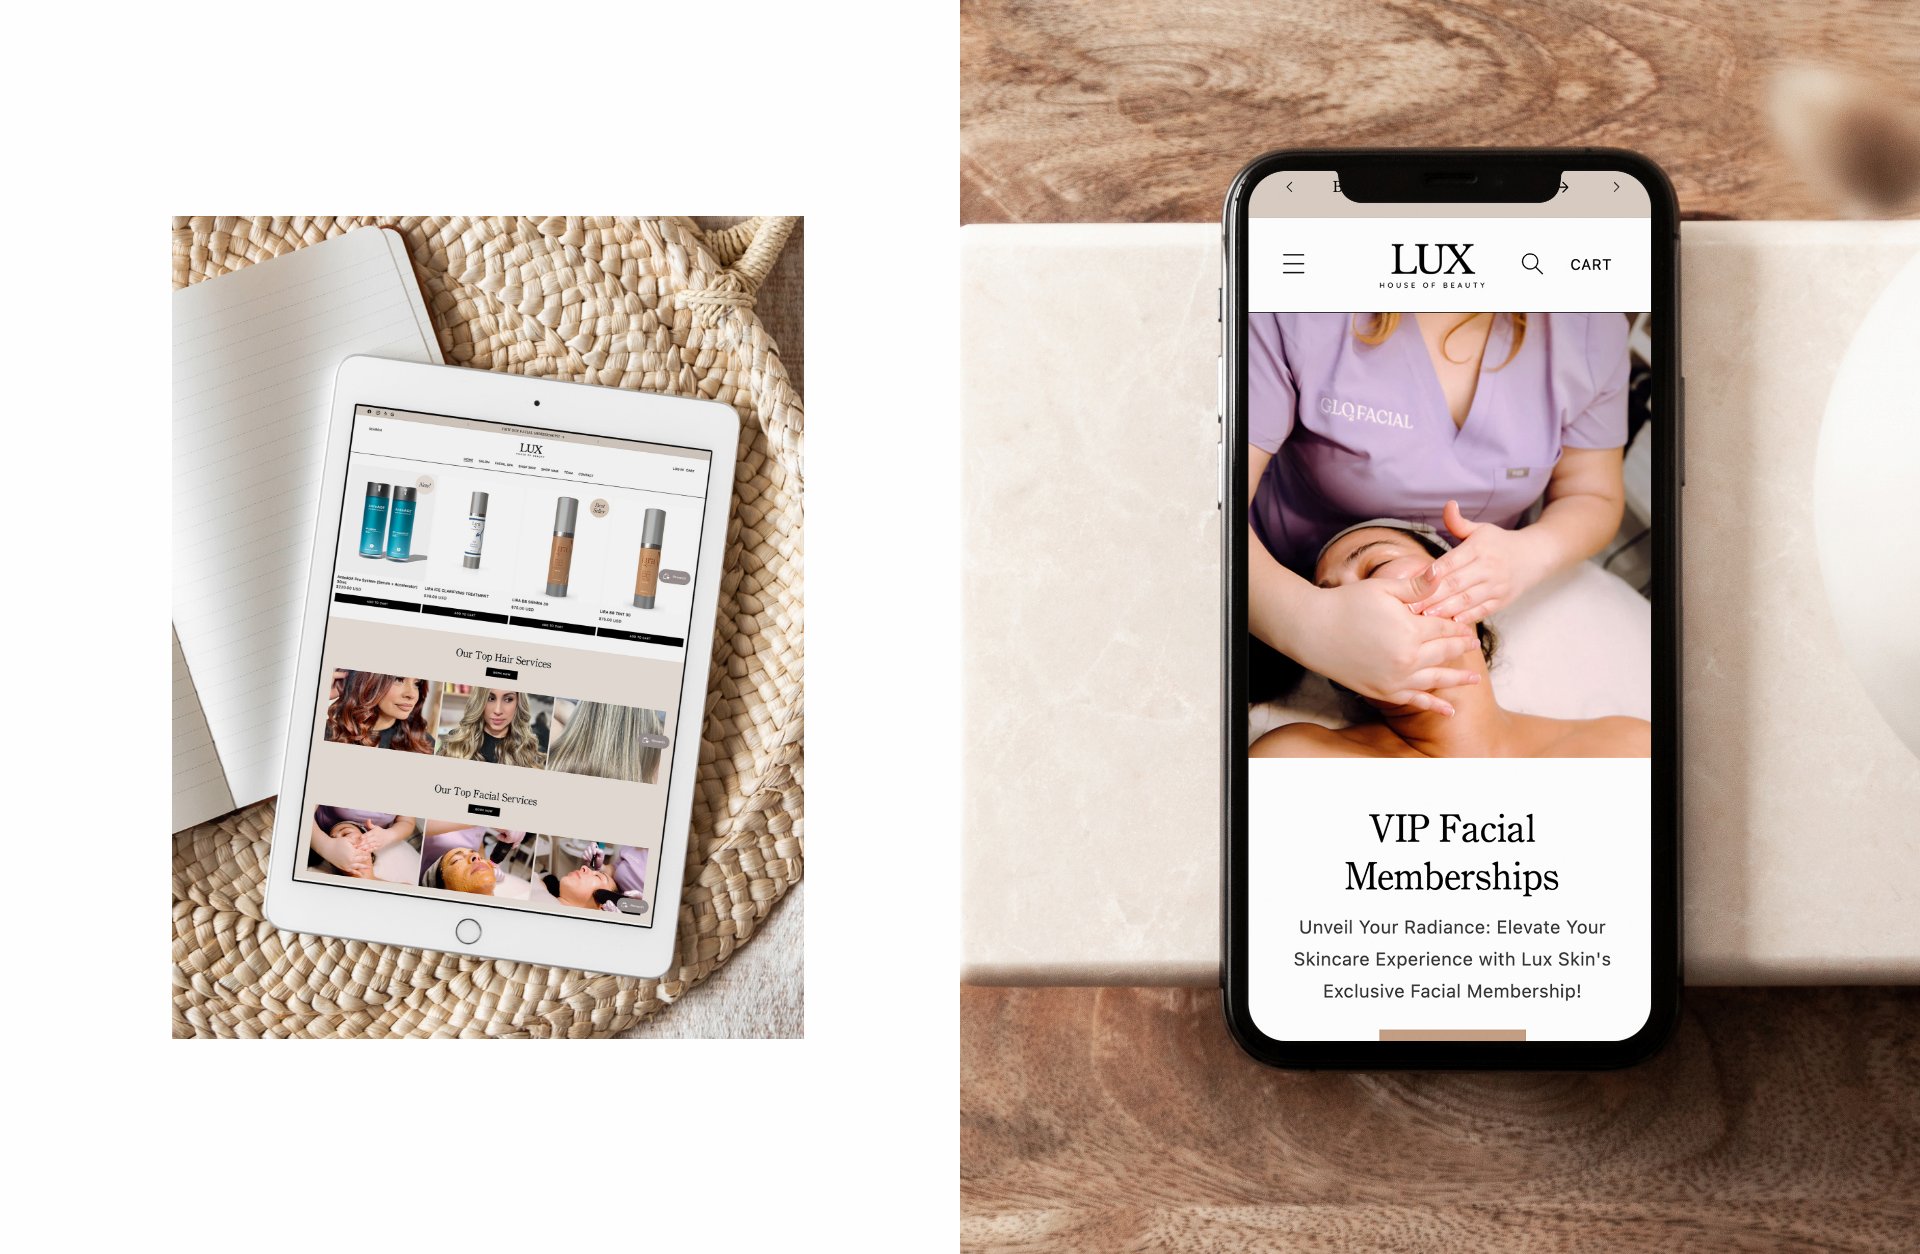 LUX-House-of-Beauty_Shopify-Website-Design_Facial-and-hair-salon_6.jpg